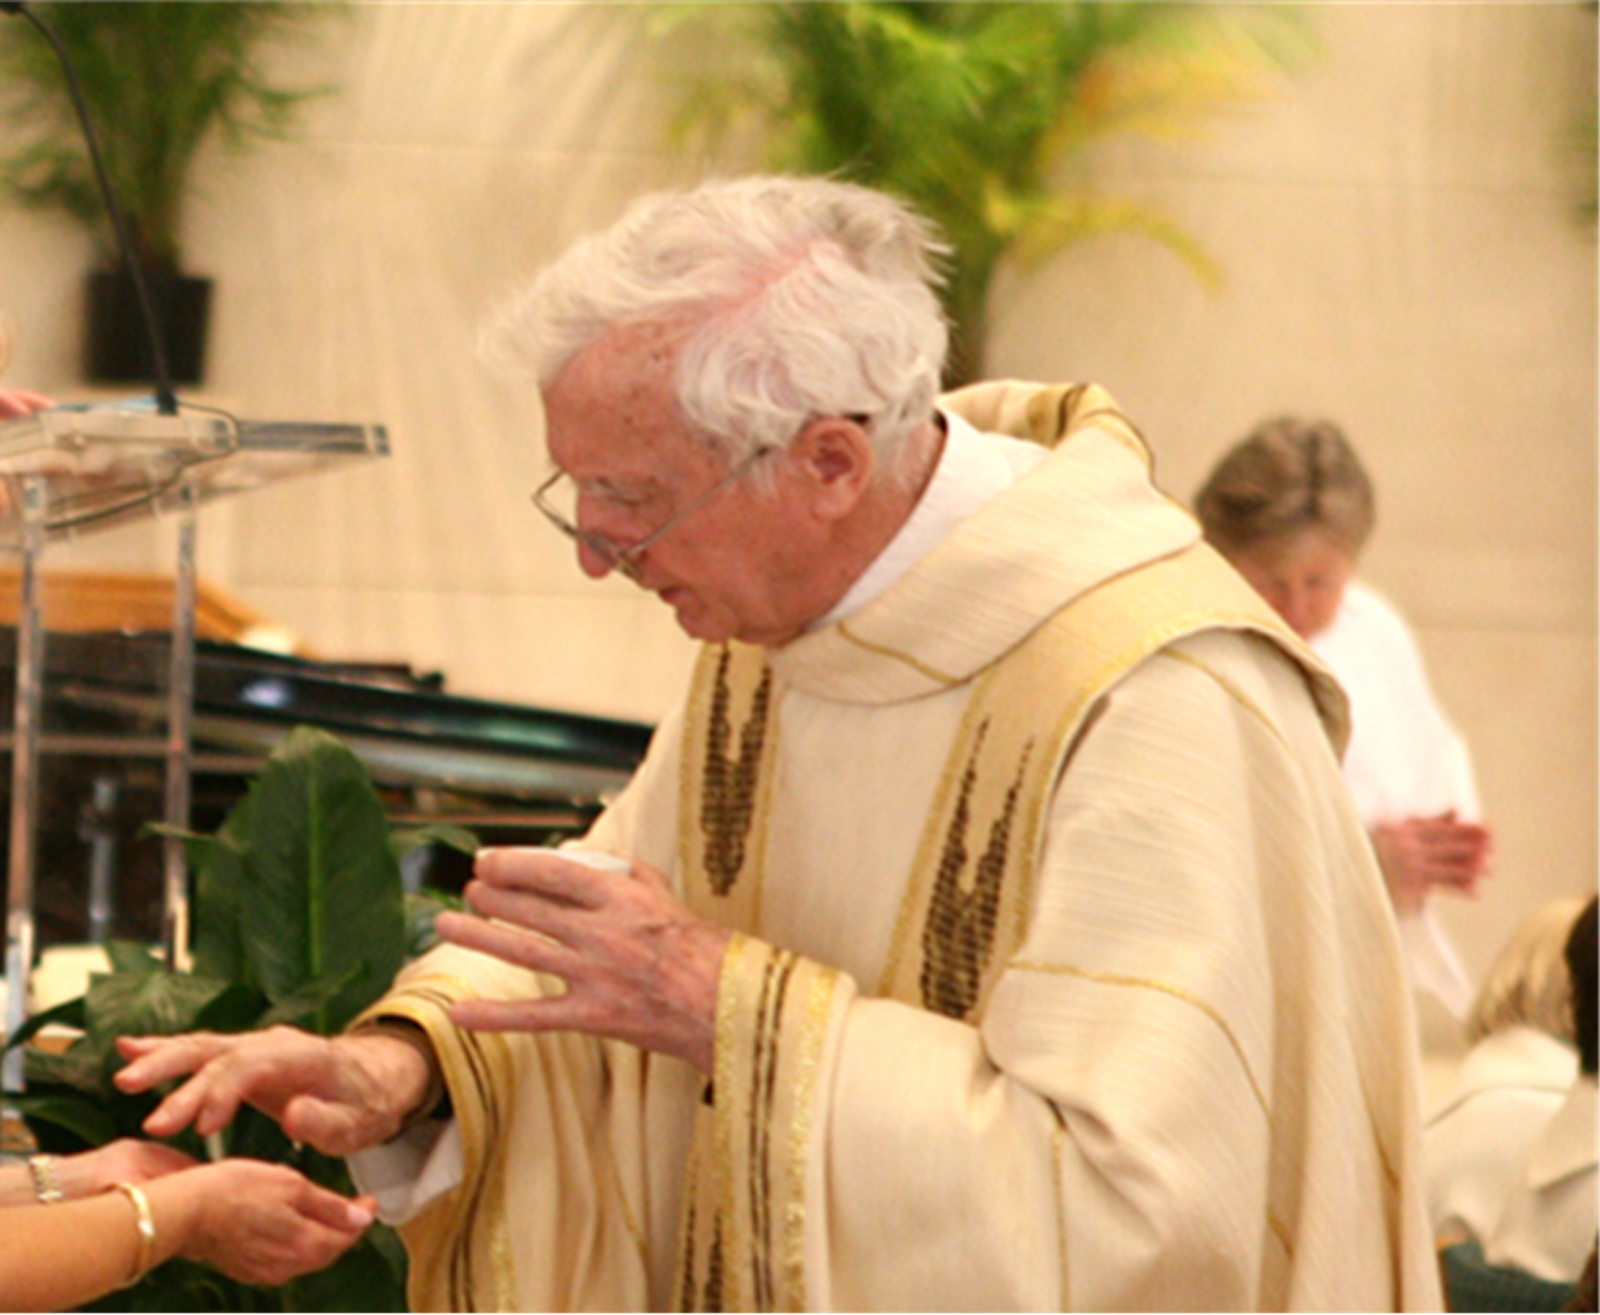 Fr. Szewczyk offers Communion during a Mass at St. Hugo of the Hills Parish in Bloomfield Hills, where he served the early Mass for decades. (Courtesy of St. Hugo of the Hills Parish)